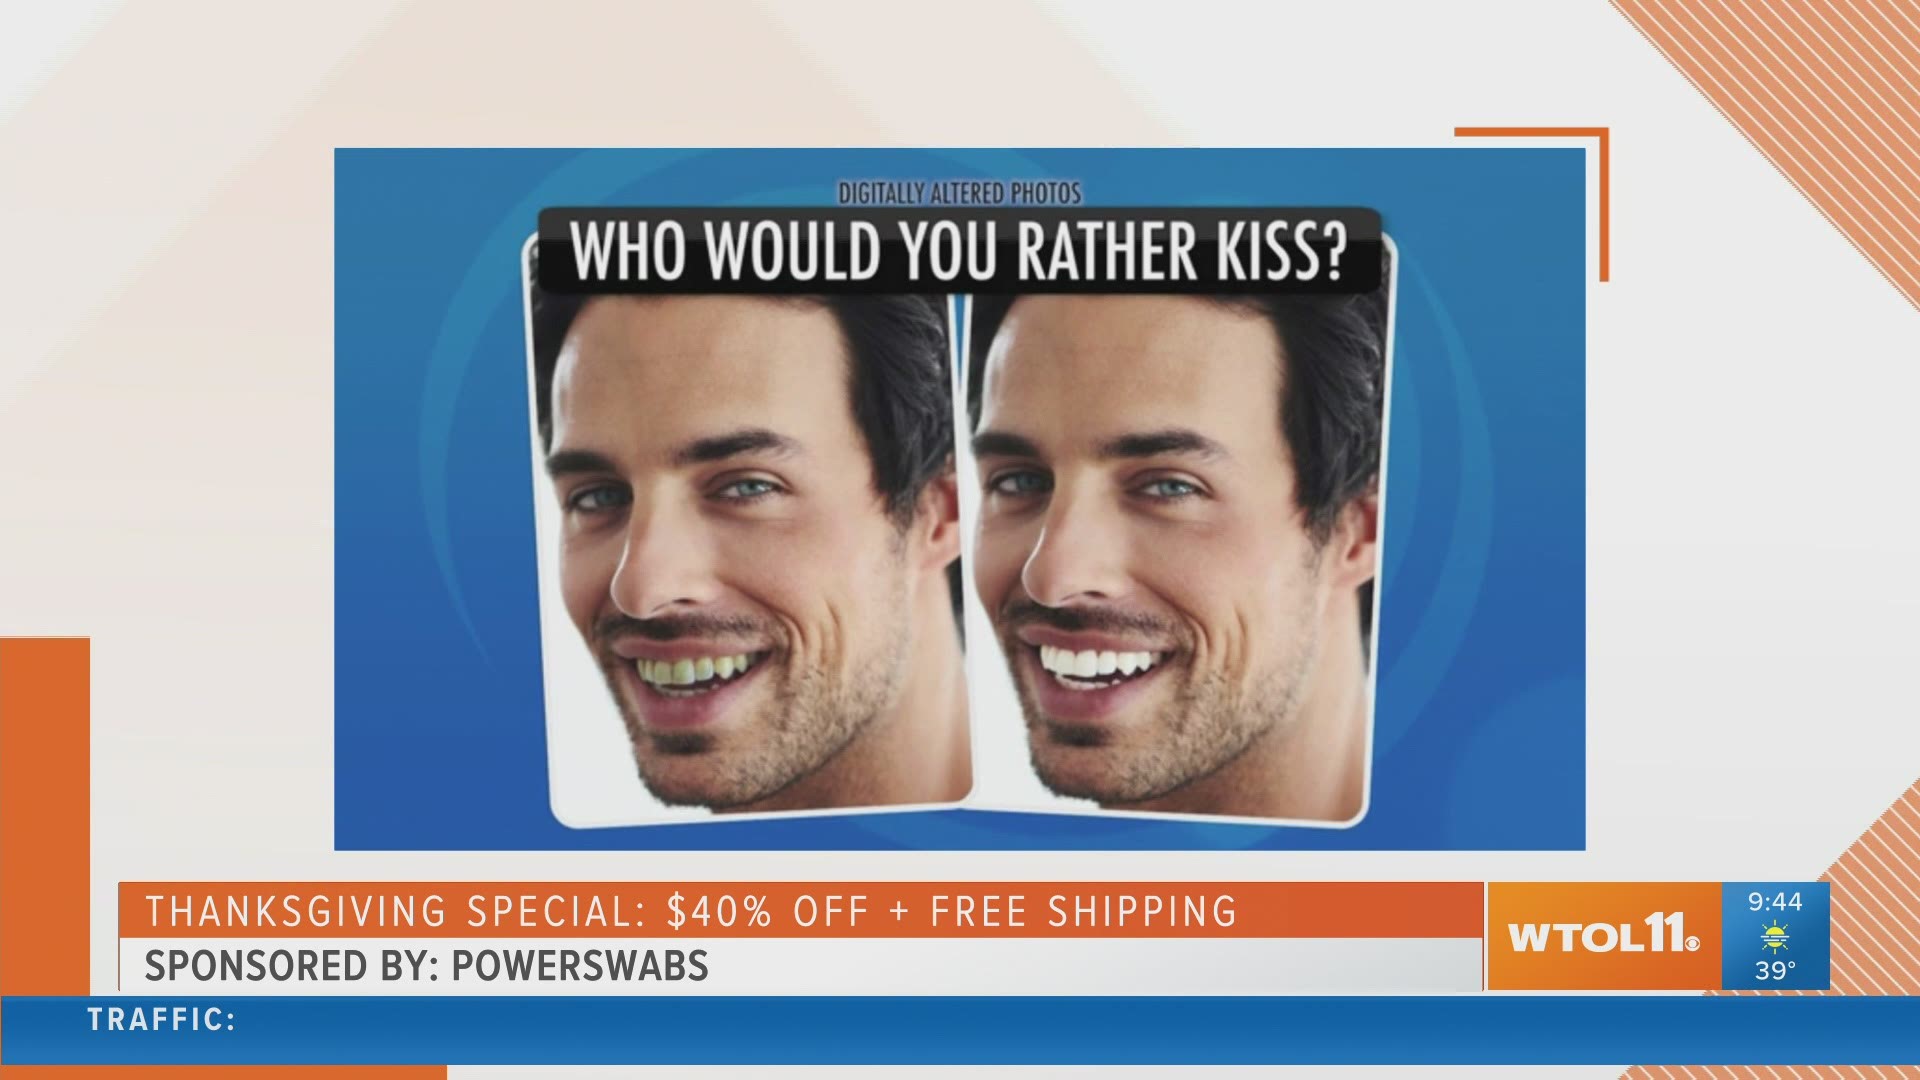 Give yourself the gift of a whiter, brighter smile this holiday season with PowerSwabs!